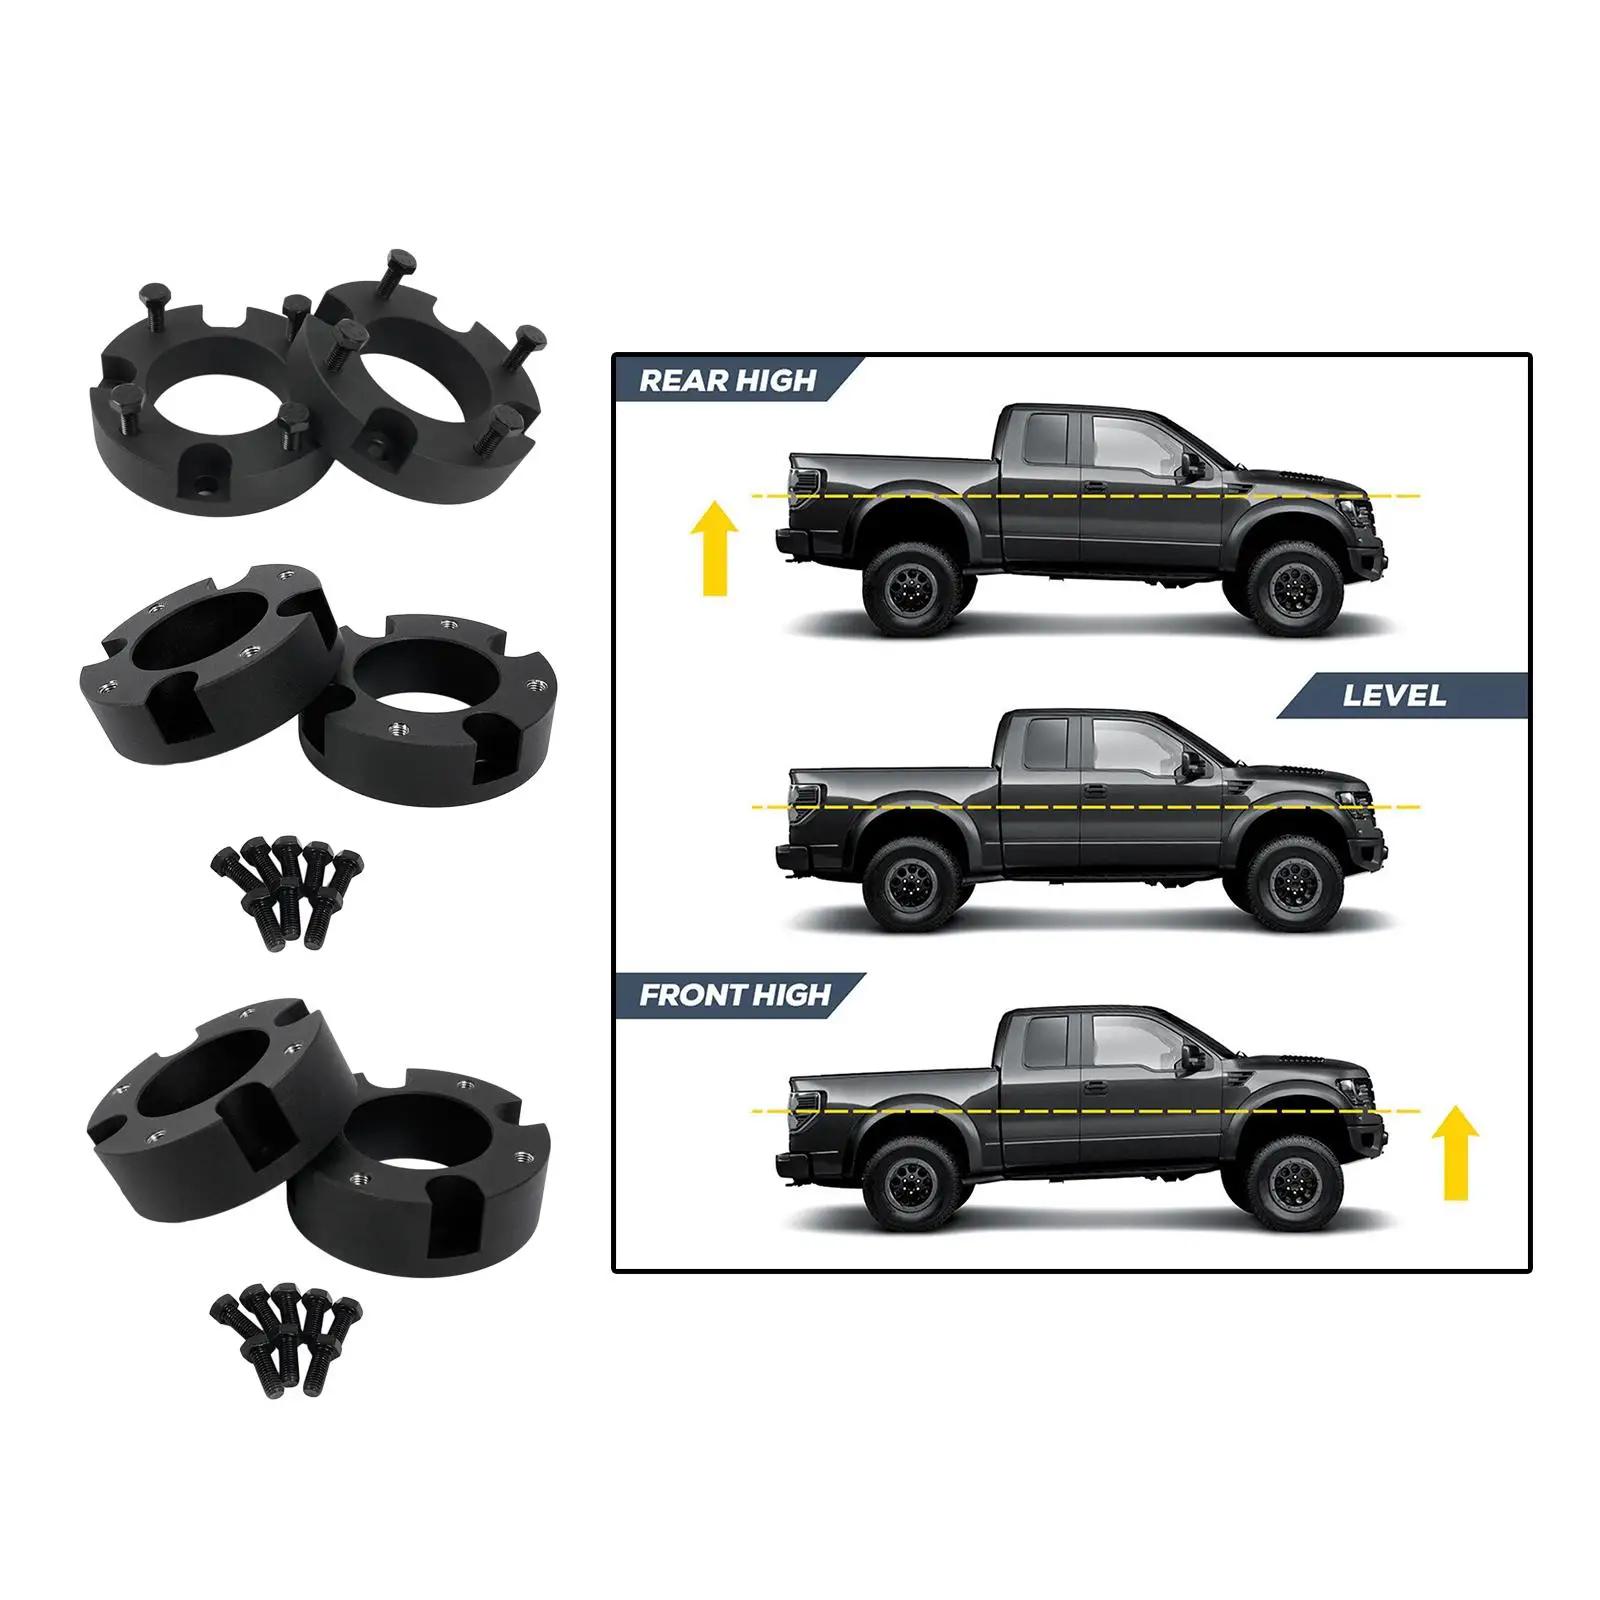 Black Leveling Lift Set Repair Parts Front Wheel Durable Spare Parts Replaces Professional Aluminum Alloy for Toyota for tundra